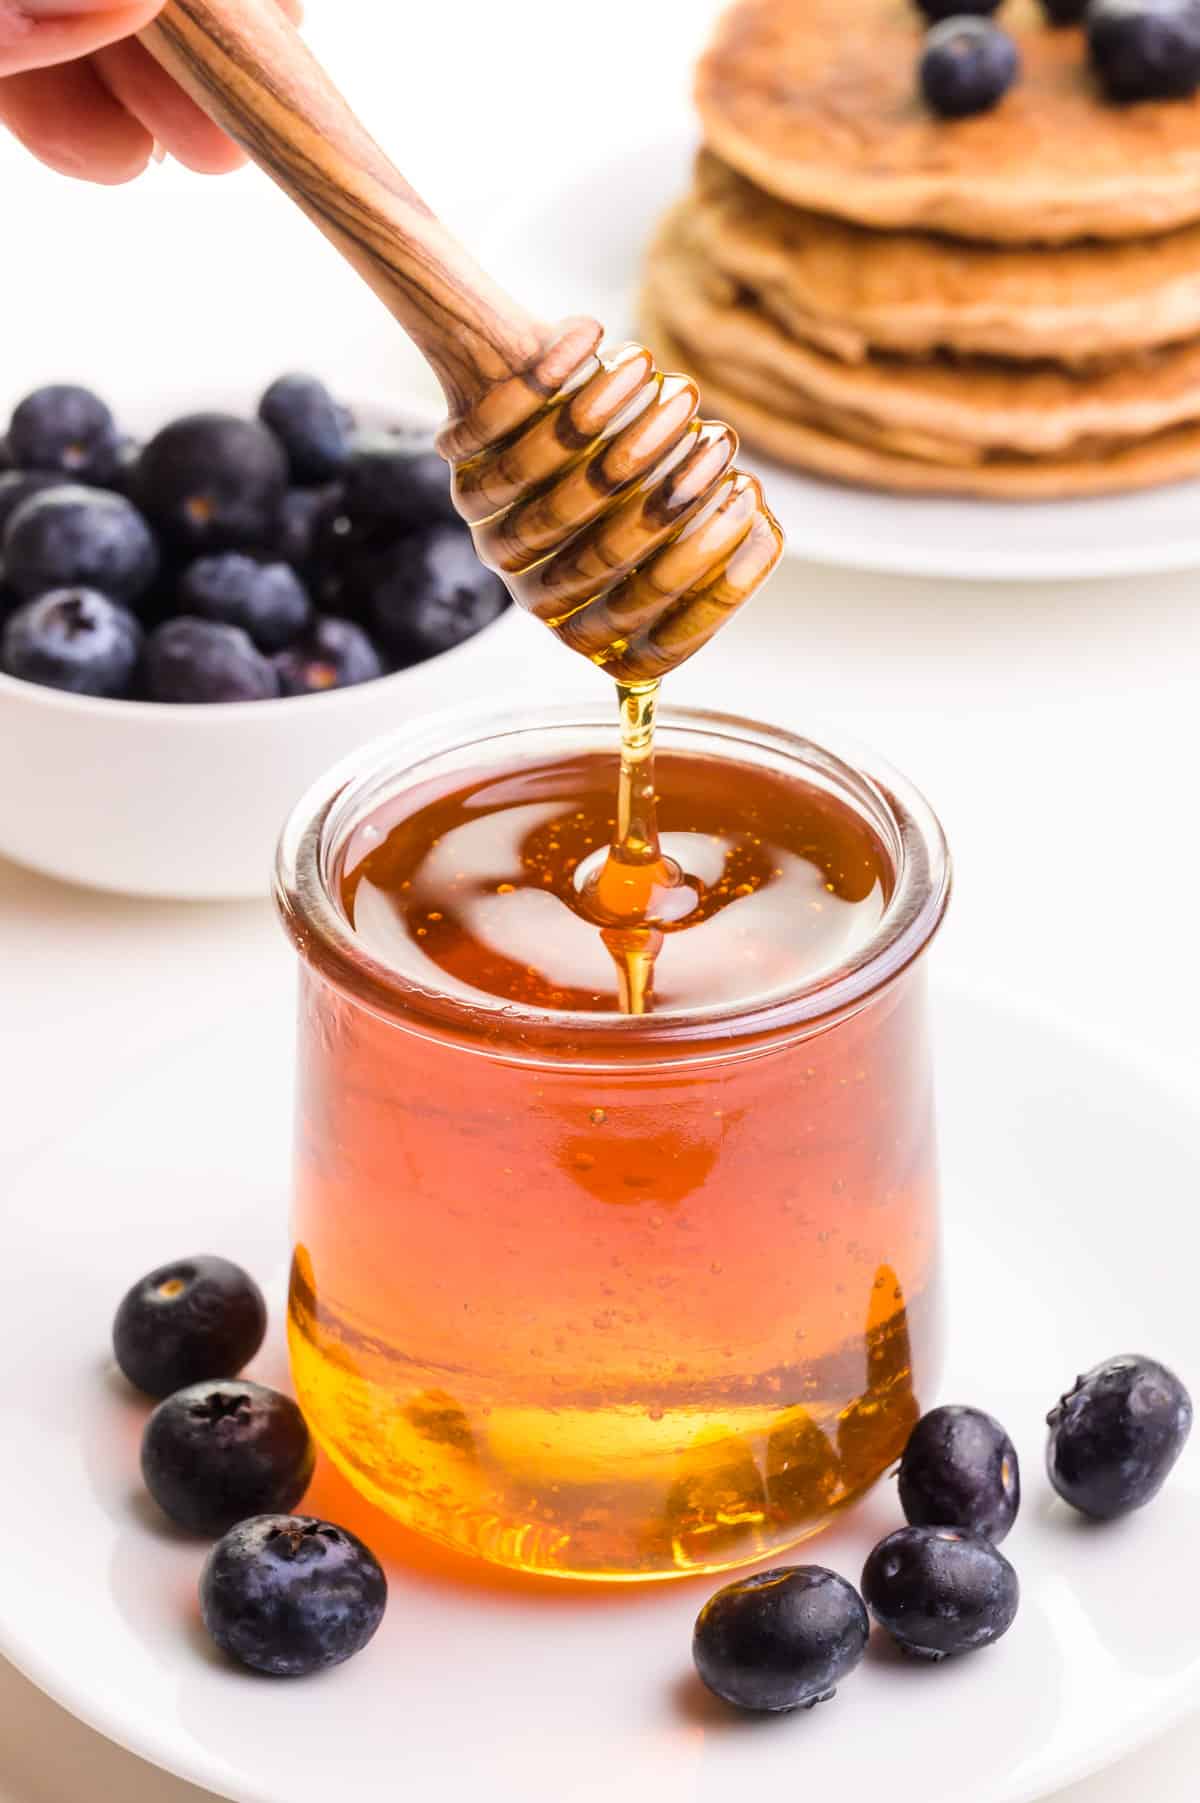 A wooden honey dipper drizzles over a jar full of honey substitute. There are fresh blueberries and pancakes in the background.